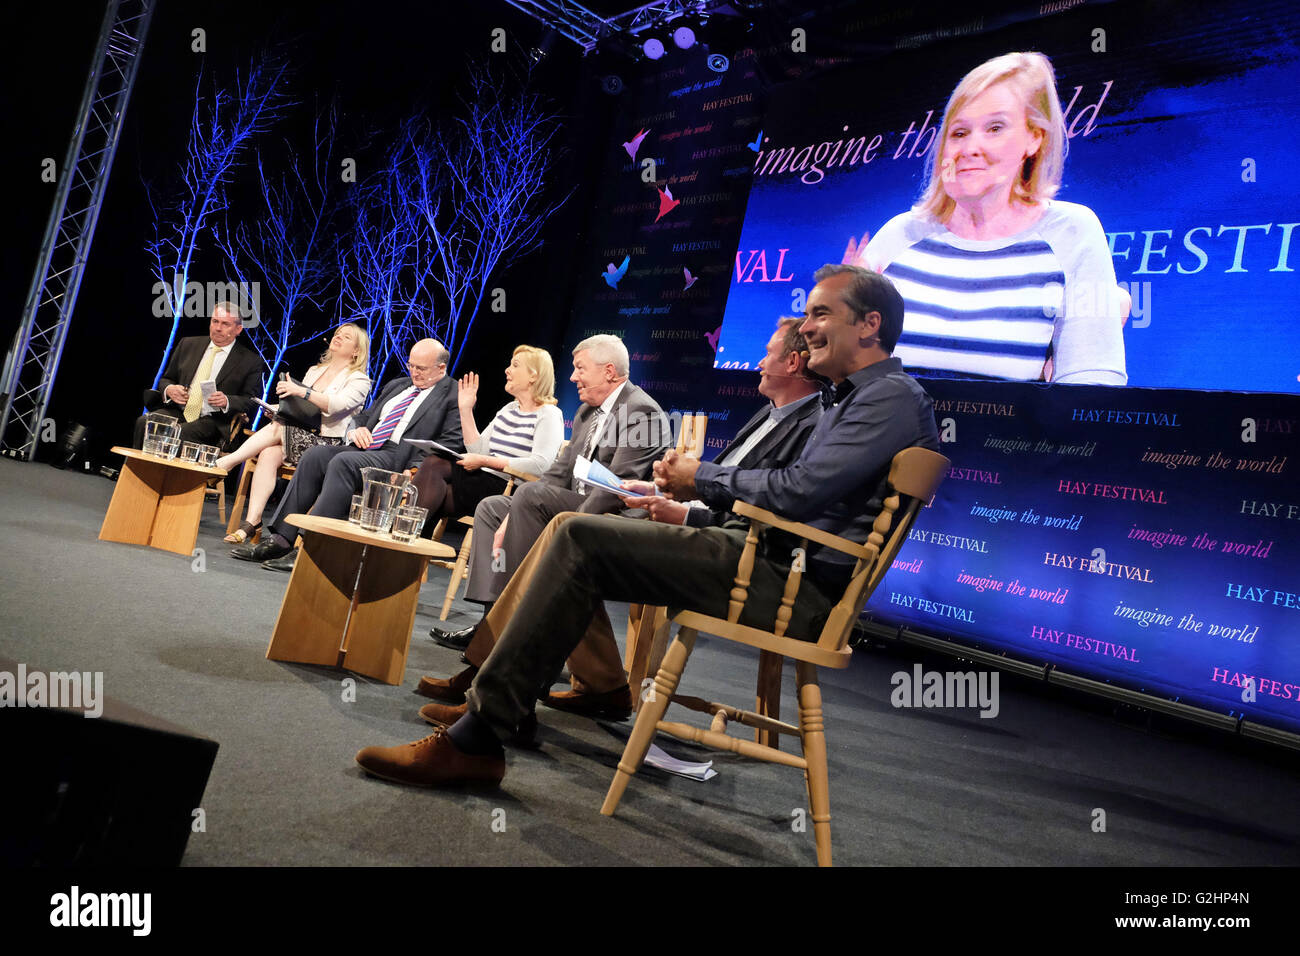 Hay Festival, Wales, UK - May 2016 -  EU Referendum debate - Does Britain Need the EU? The European Union debate sponsored by the Daily Telegraph features from left to right LIAM FOX MP, ALLISON PEARSON, ROGER BOOTLE, chair Martha Kearney, ALAN JOHNSON MP, NICK HERBERT MP and ROLAND RUDD Stock Photo